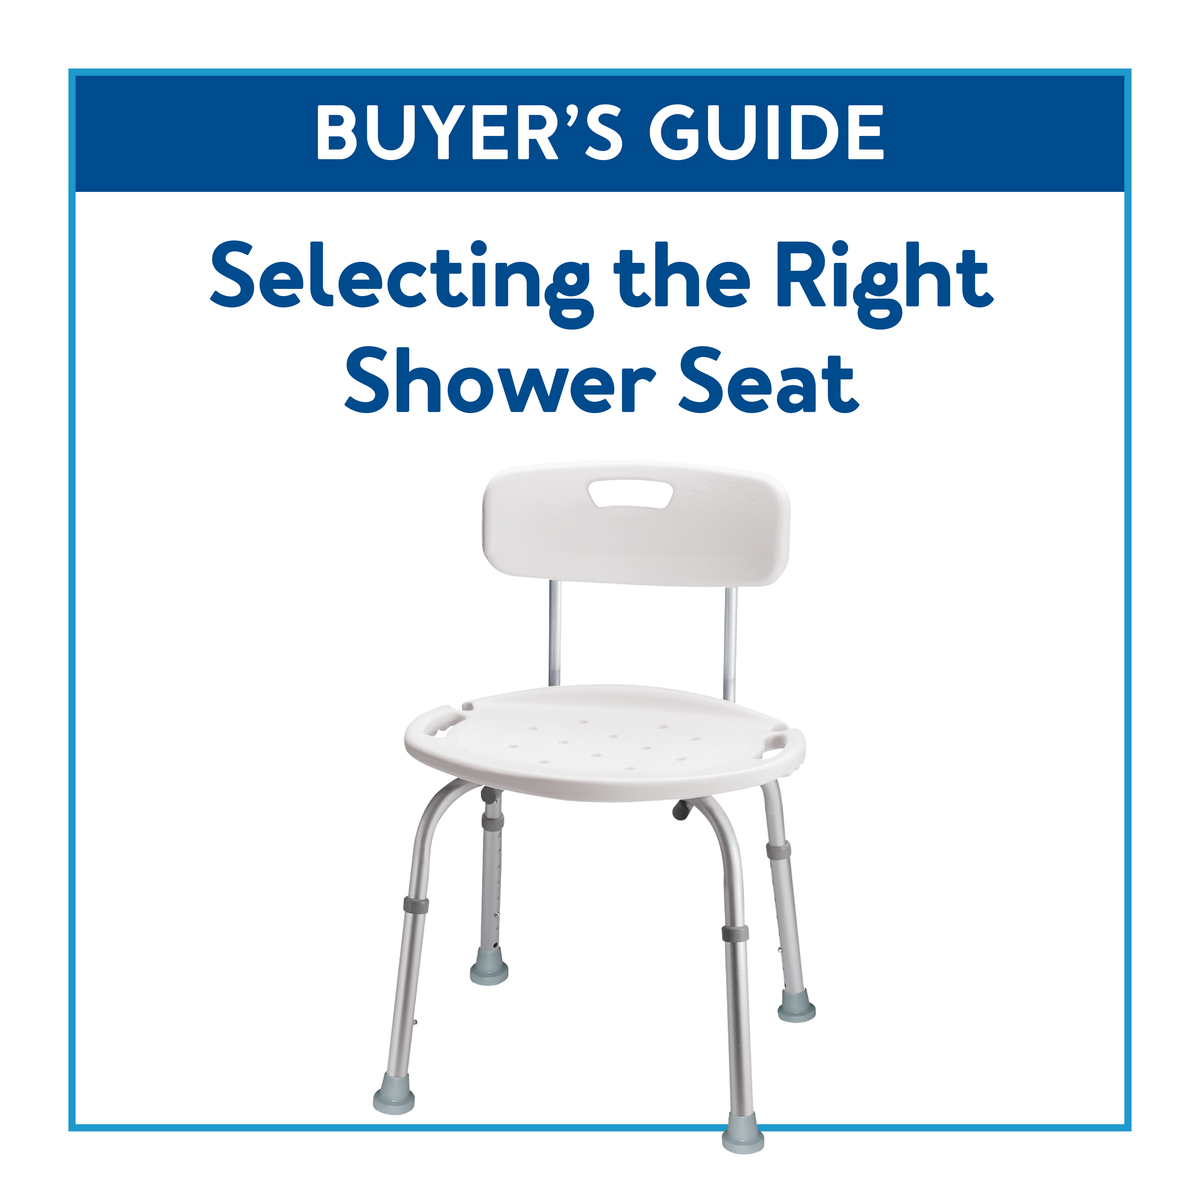 A Carex Shower Seat surrounded by a blue border and text Buyer’s Guide: Selecting the Right Shower Seat